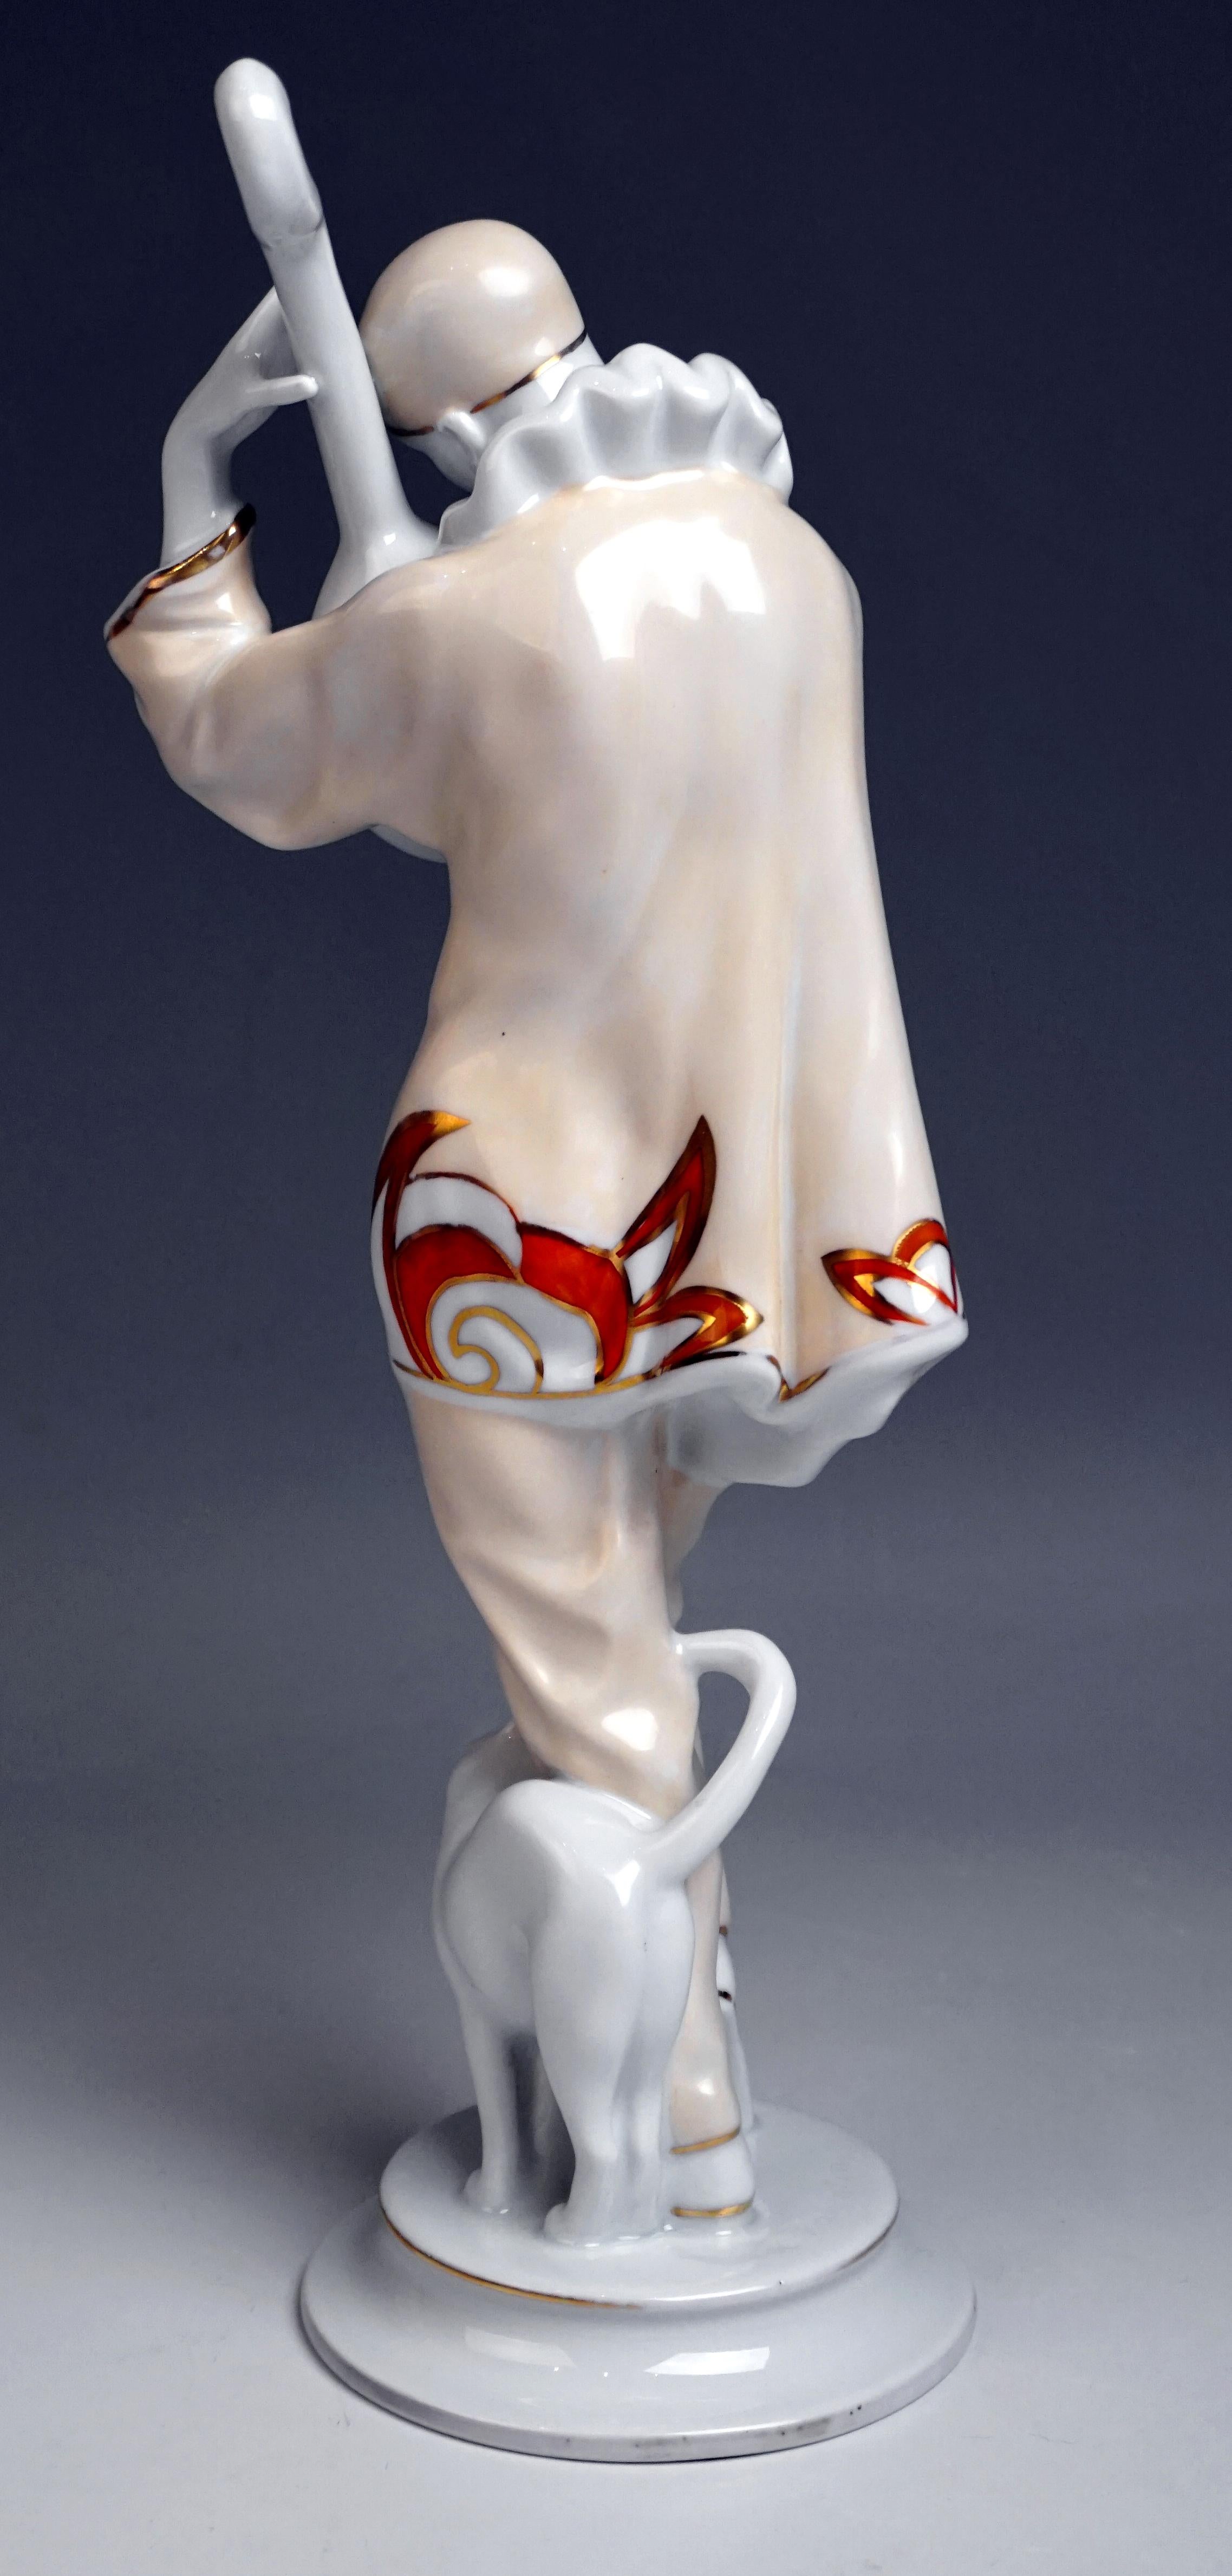 Art Deco Rosenthal Art Déco Figurine Pierrot 'Ash Wednesday' Max Valentin Germany, 1922 For Sale